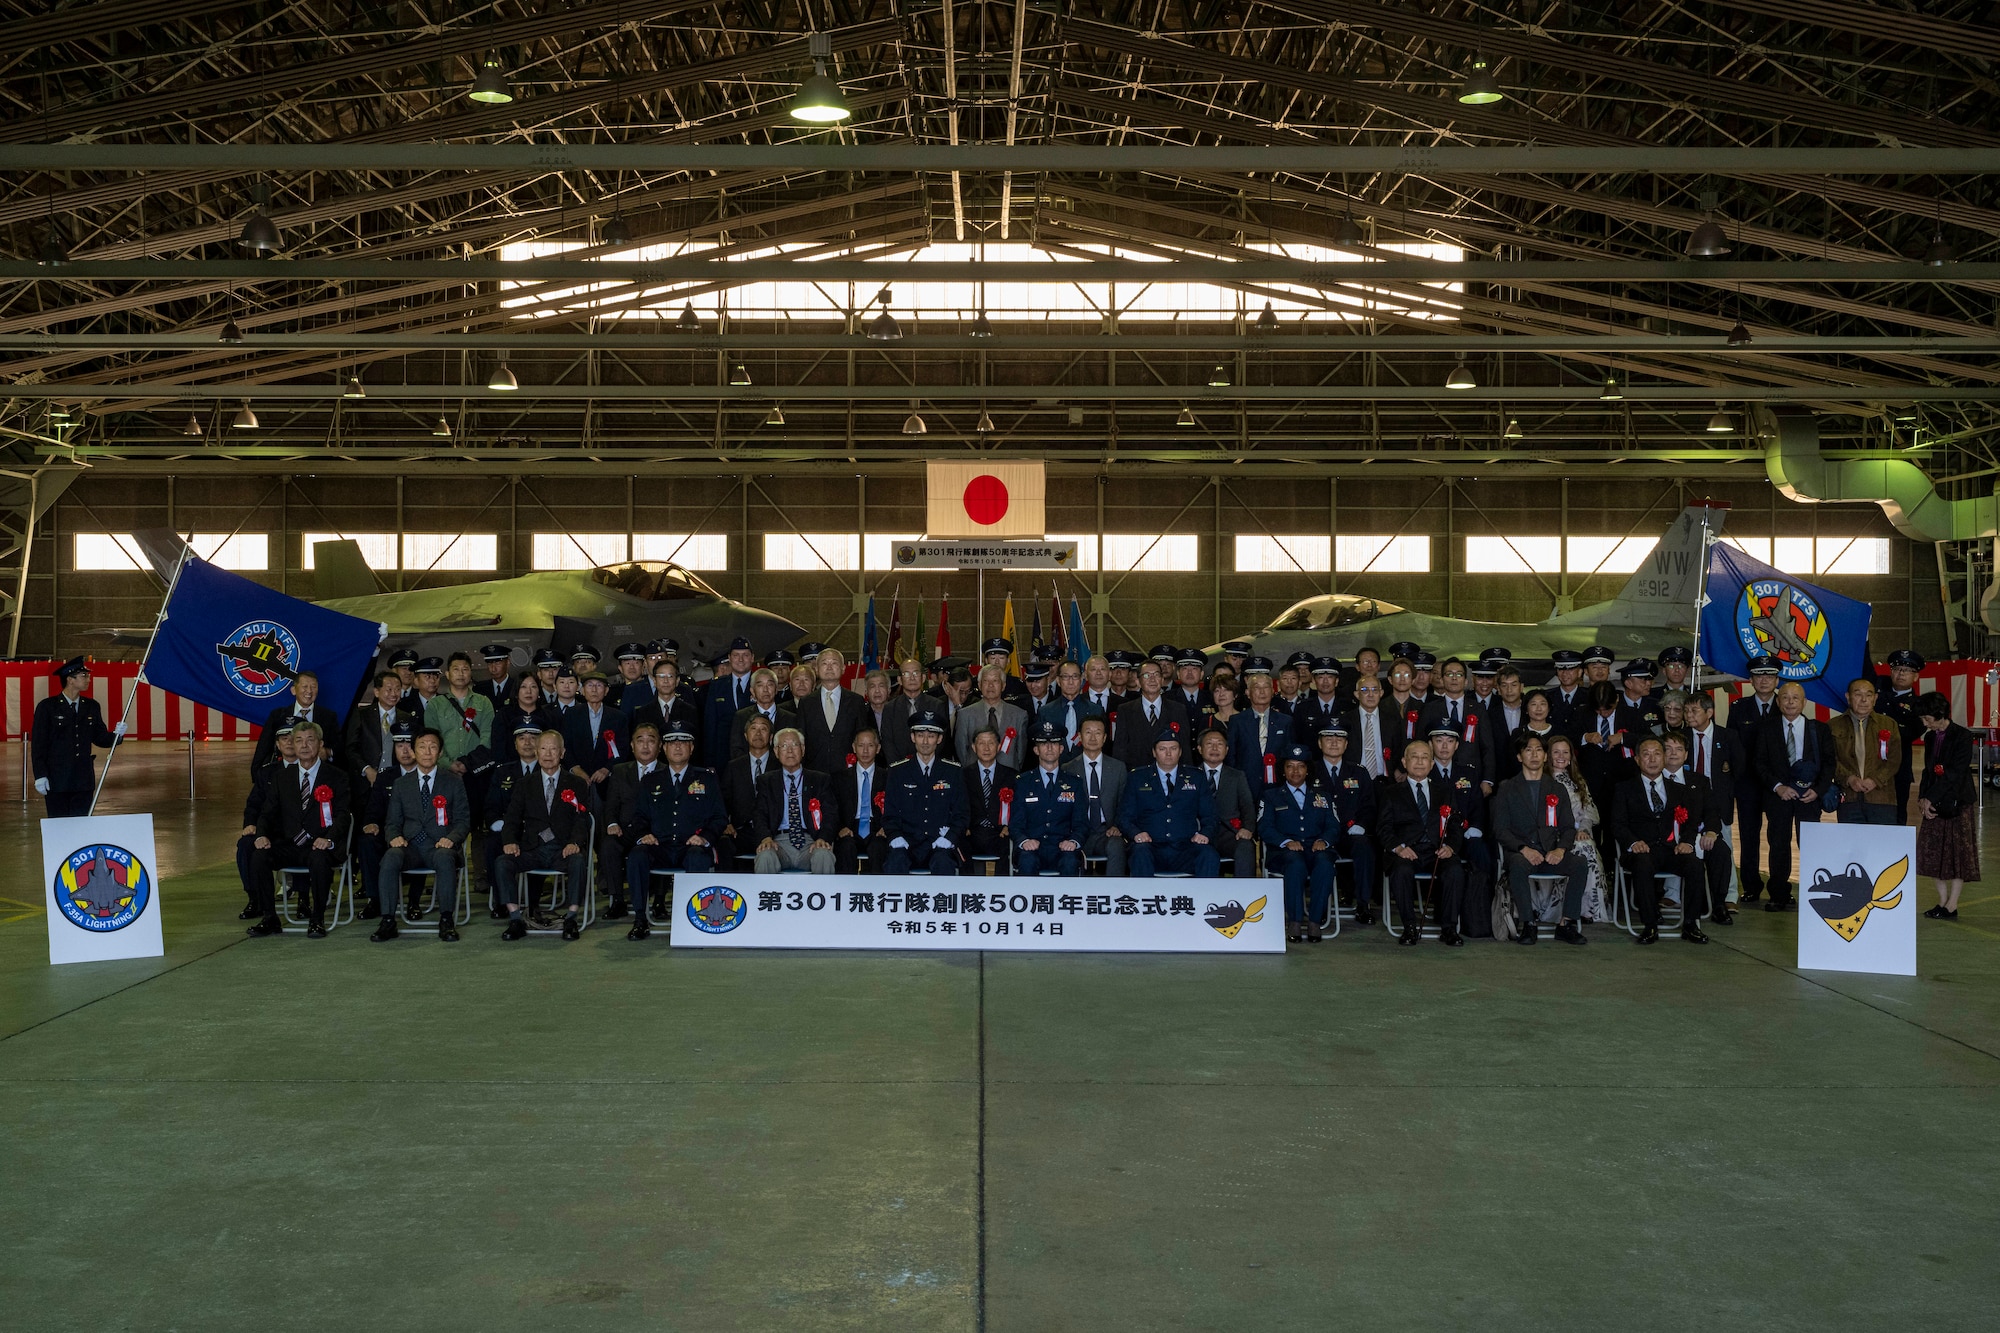 U.S. Air Force and Japan Air Self-Defense Force members pose for a group photo during the 301st Tactical Fighter Squadron’s 50th anniversary ceremony at Misawa Air Base, Japan, Oct 14, 2023.